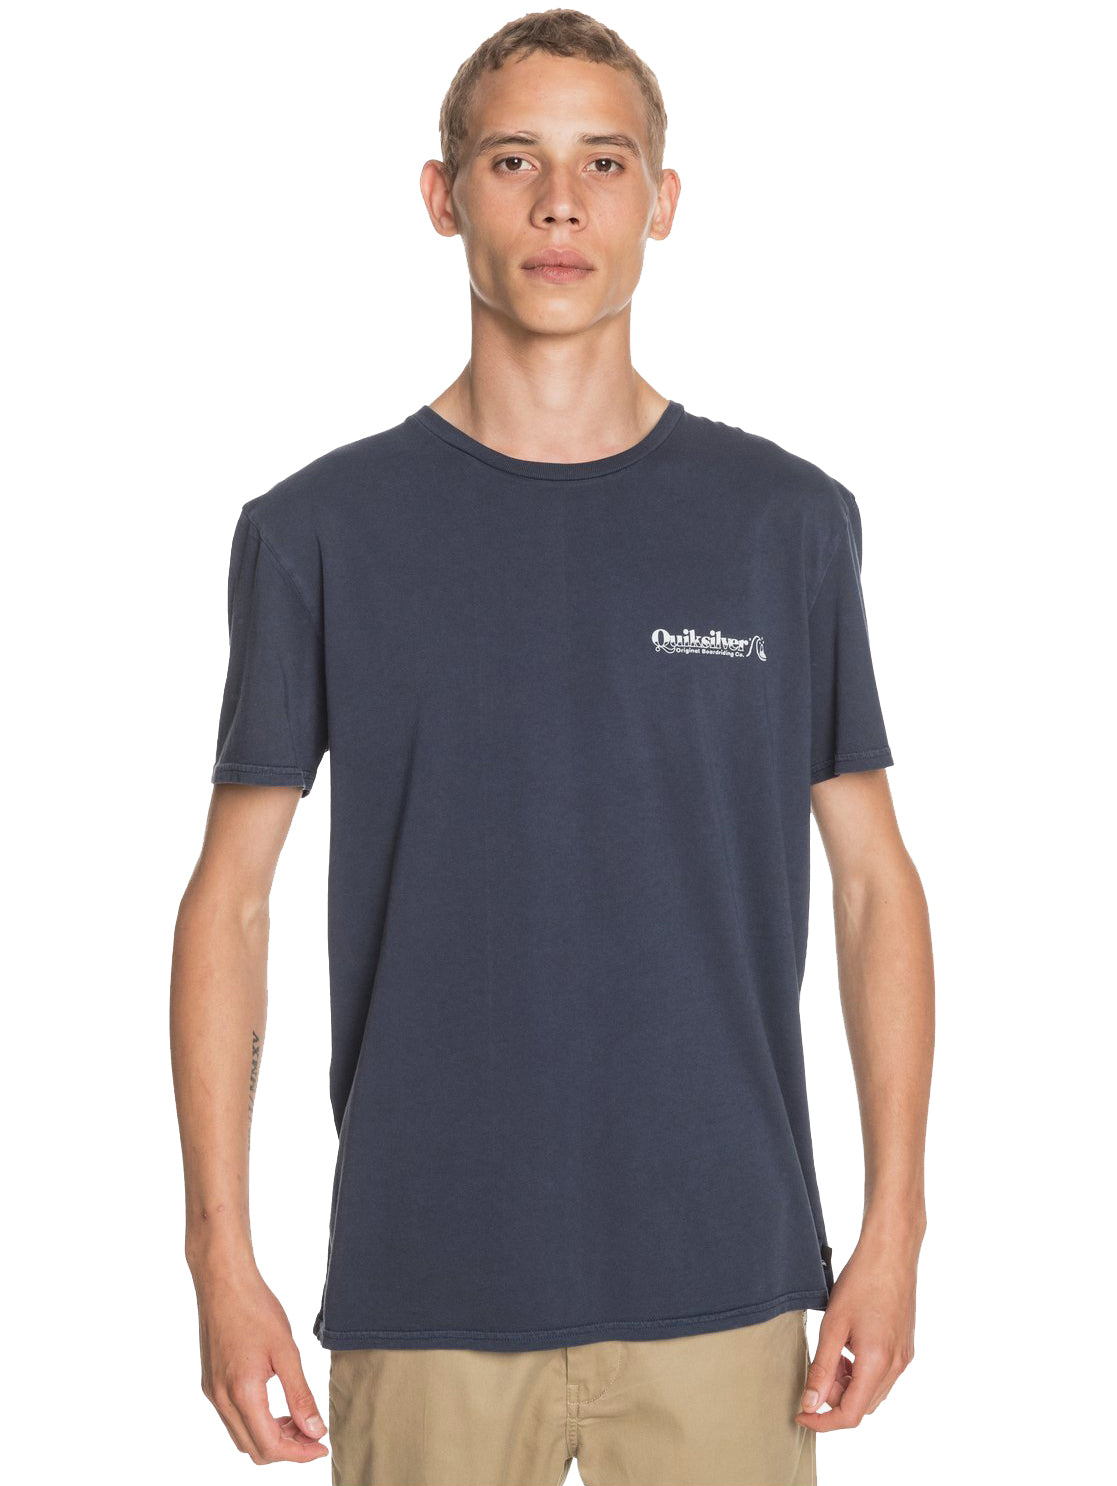 Quiksilver Sun Damages Mens Tee BYP0 S